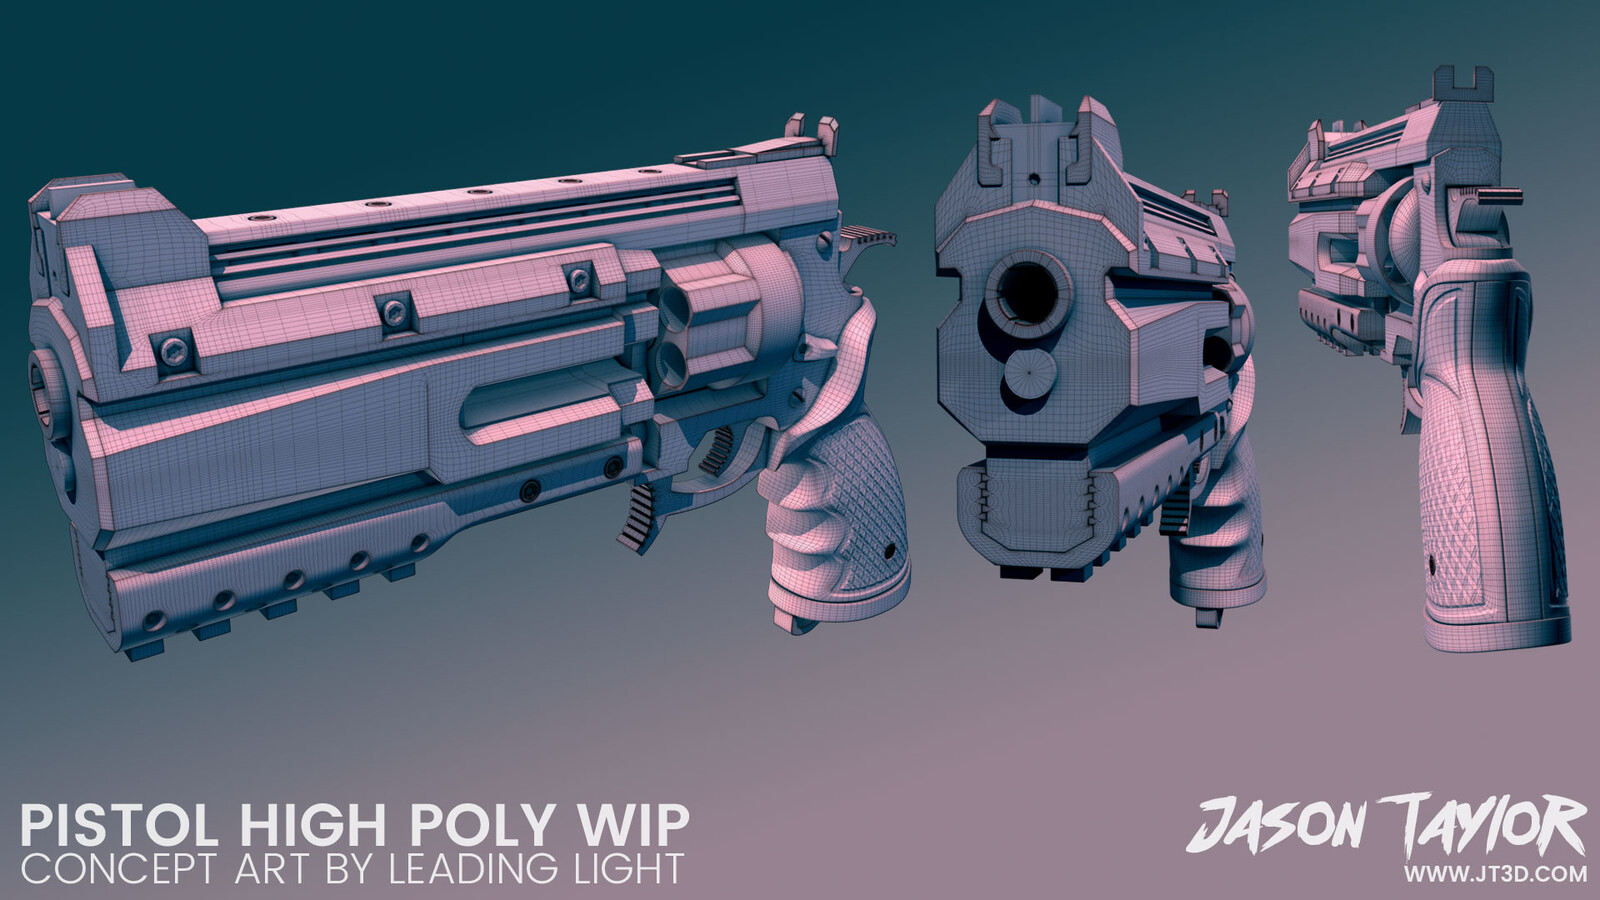 High poly model. Concept art by Leading Light.